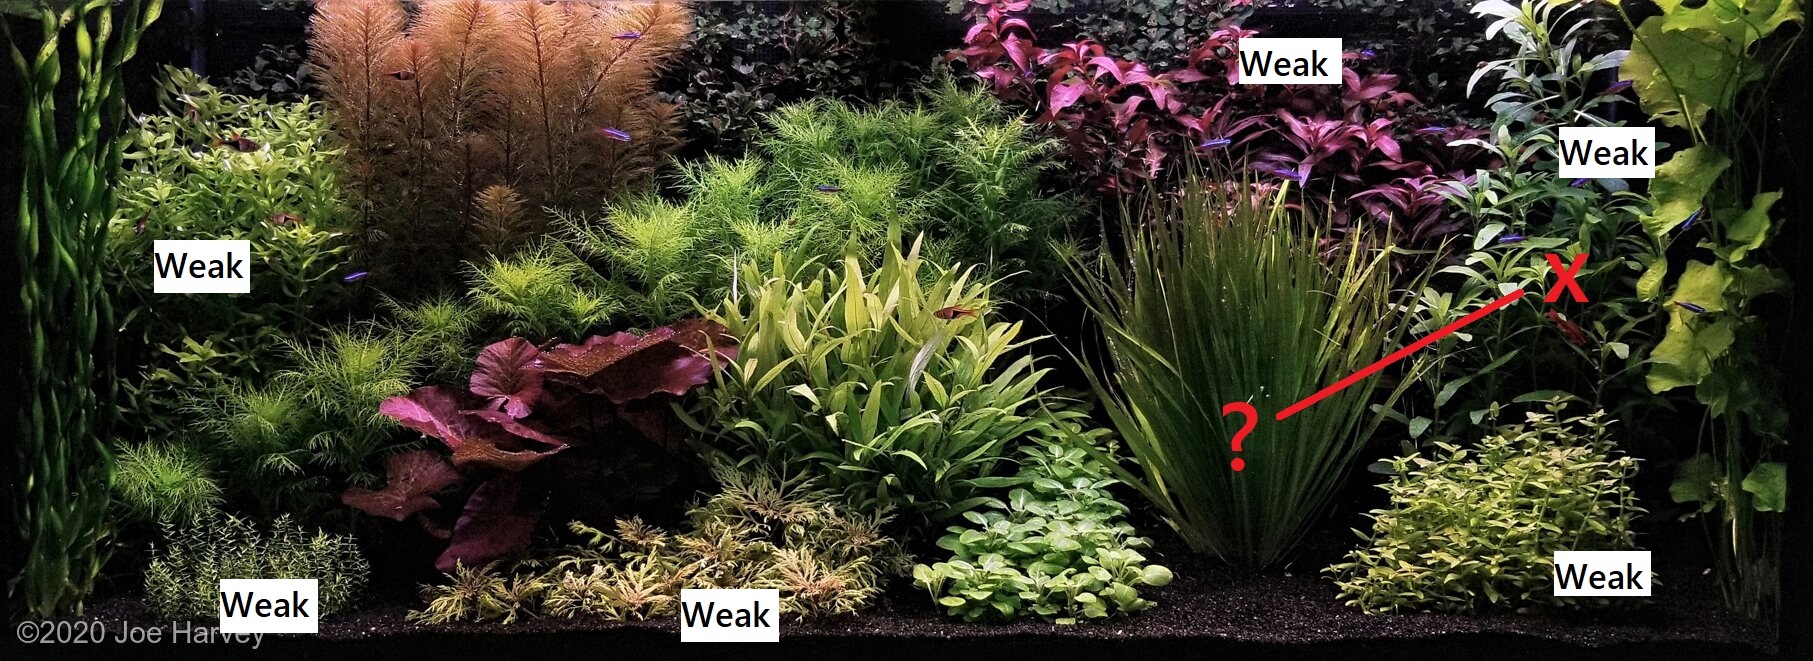 Some Rules for Dutch Style Aquascaping - A Quick Guide for Beginners